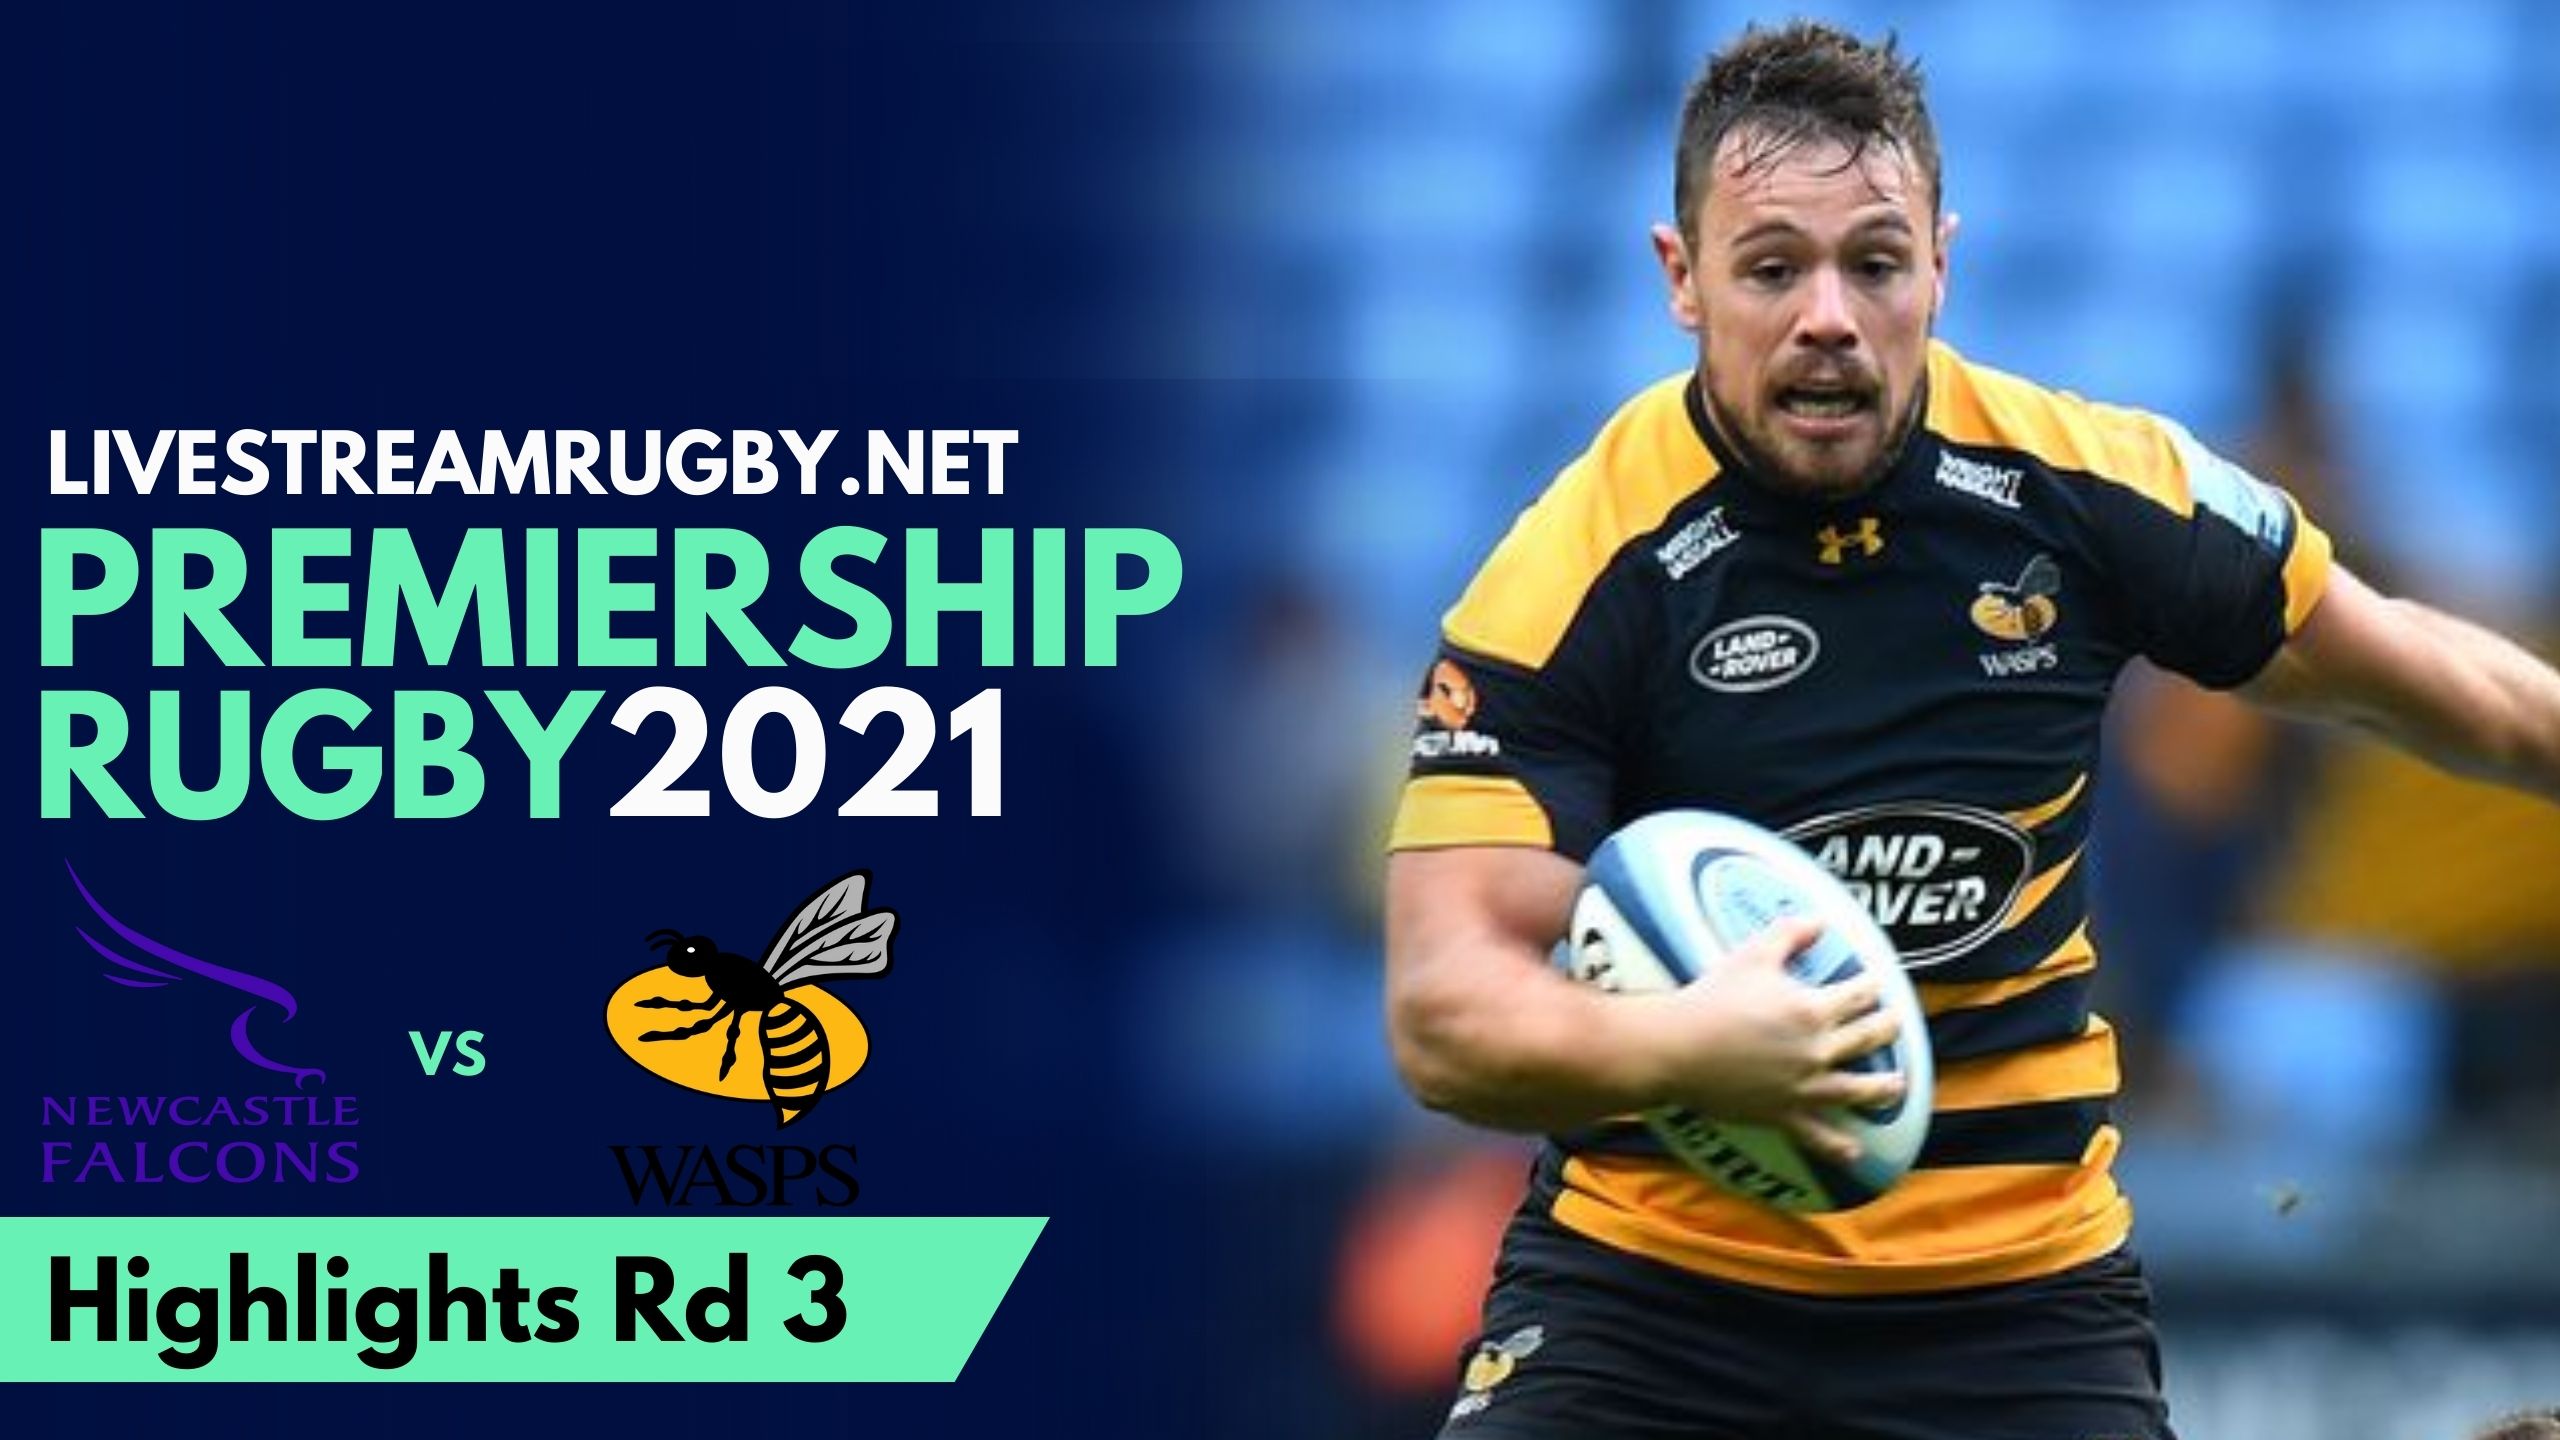 Newcastle Vs Wasps Highlights 2021 Rd 3